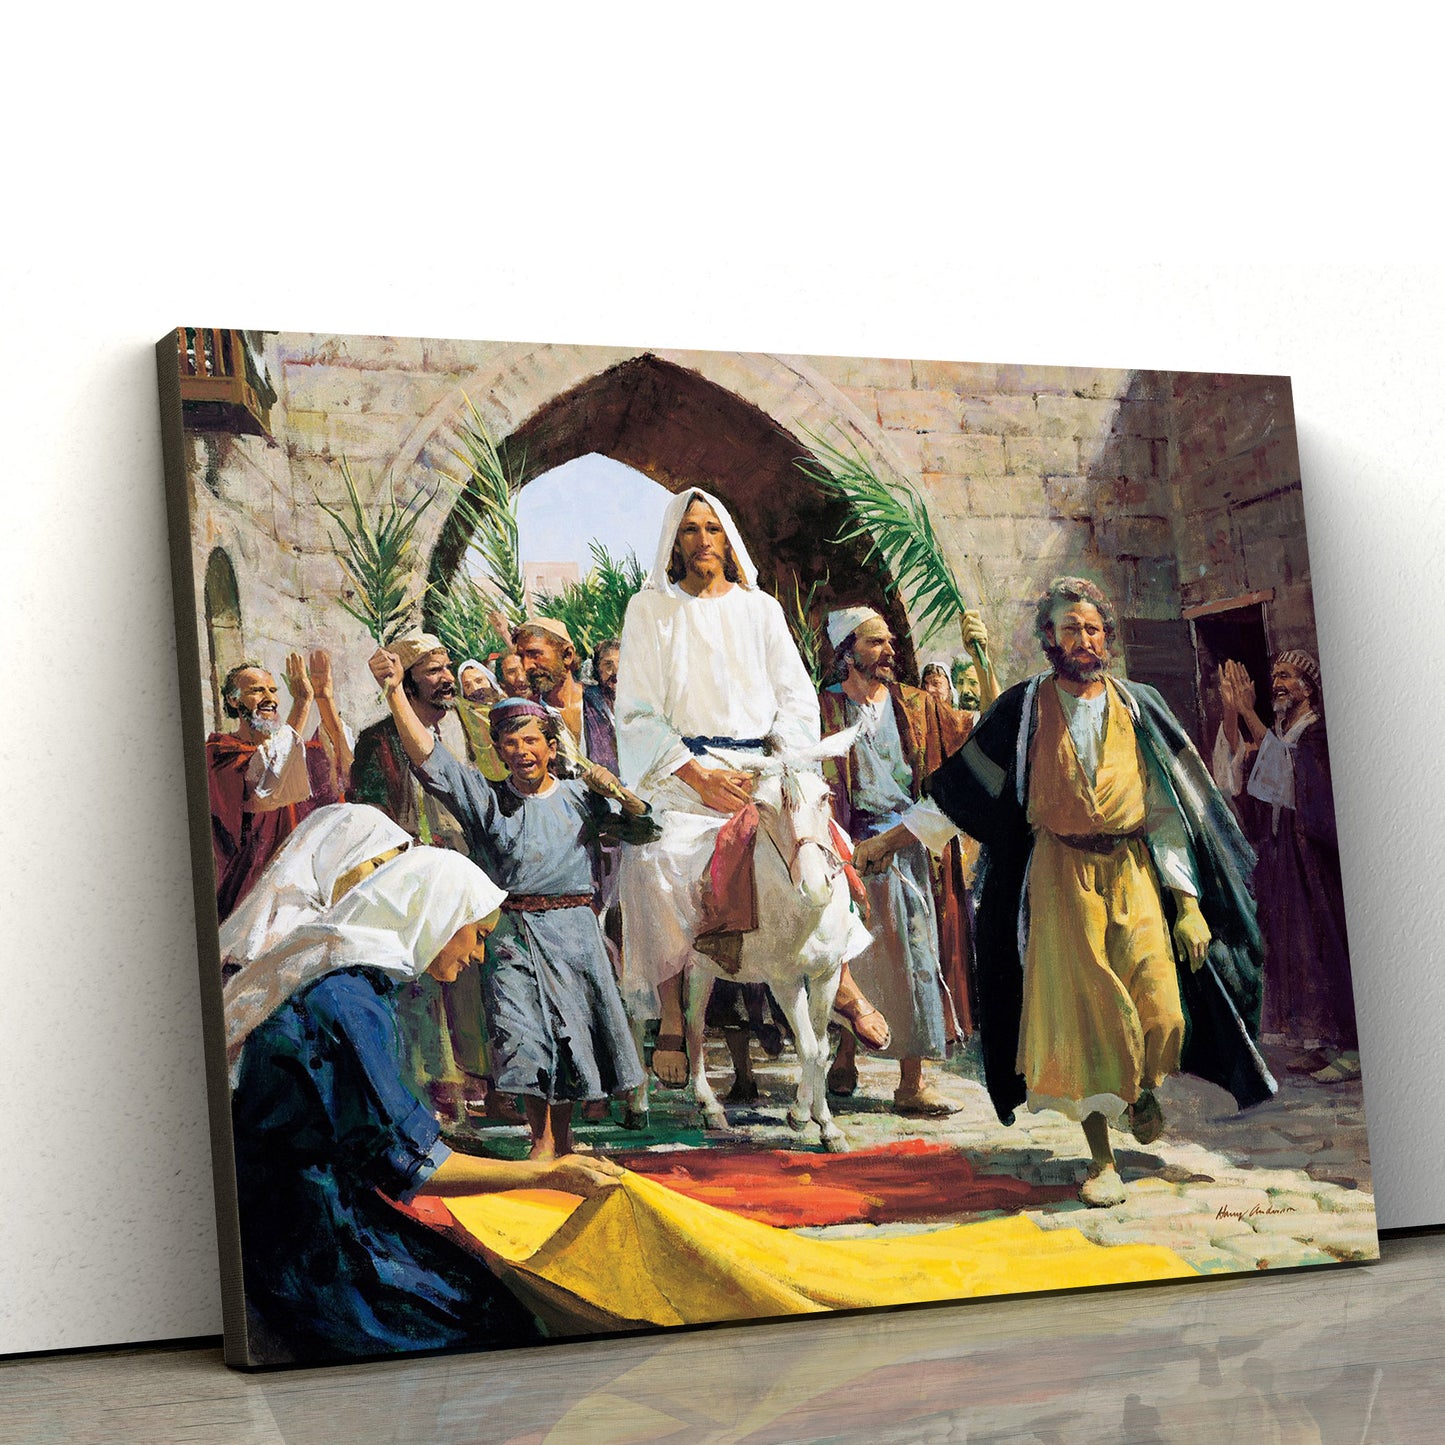 Triumphal Entry Canvas Pictures - Christian Paintings For Home - Religious Canvas Wall Decor